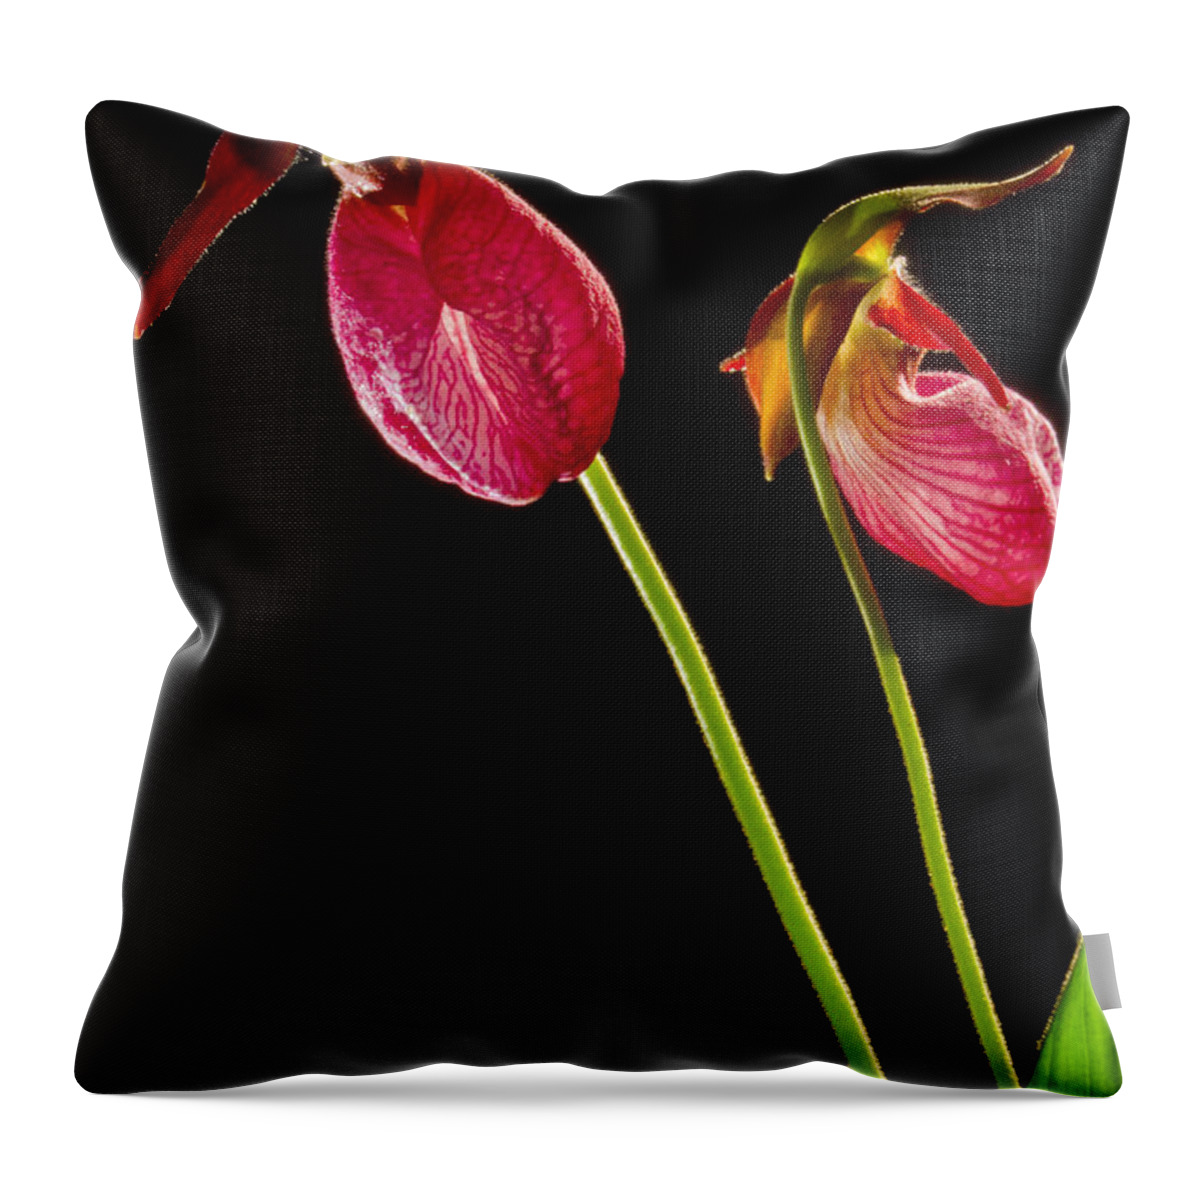 Photography Throw Pillow featuring the photograph No Lady Slipper Was Harmed by Frederic A Reinecke